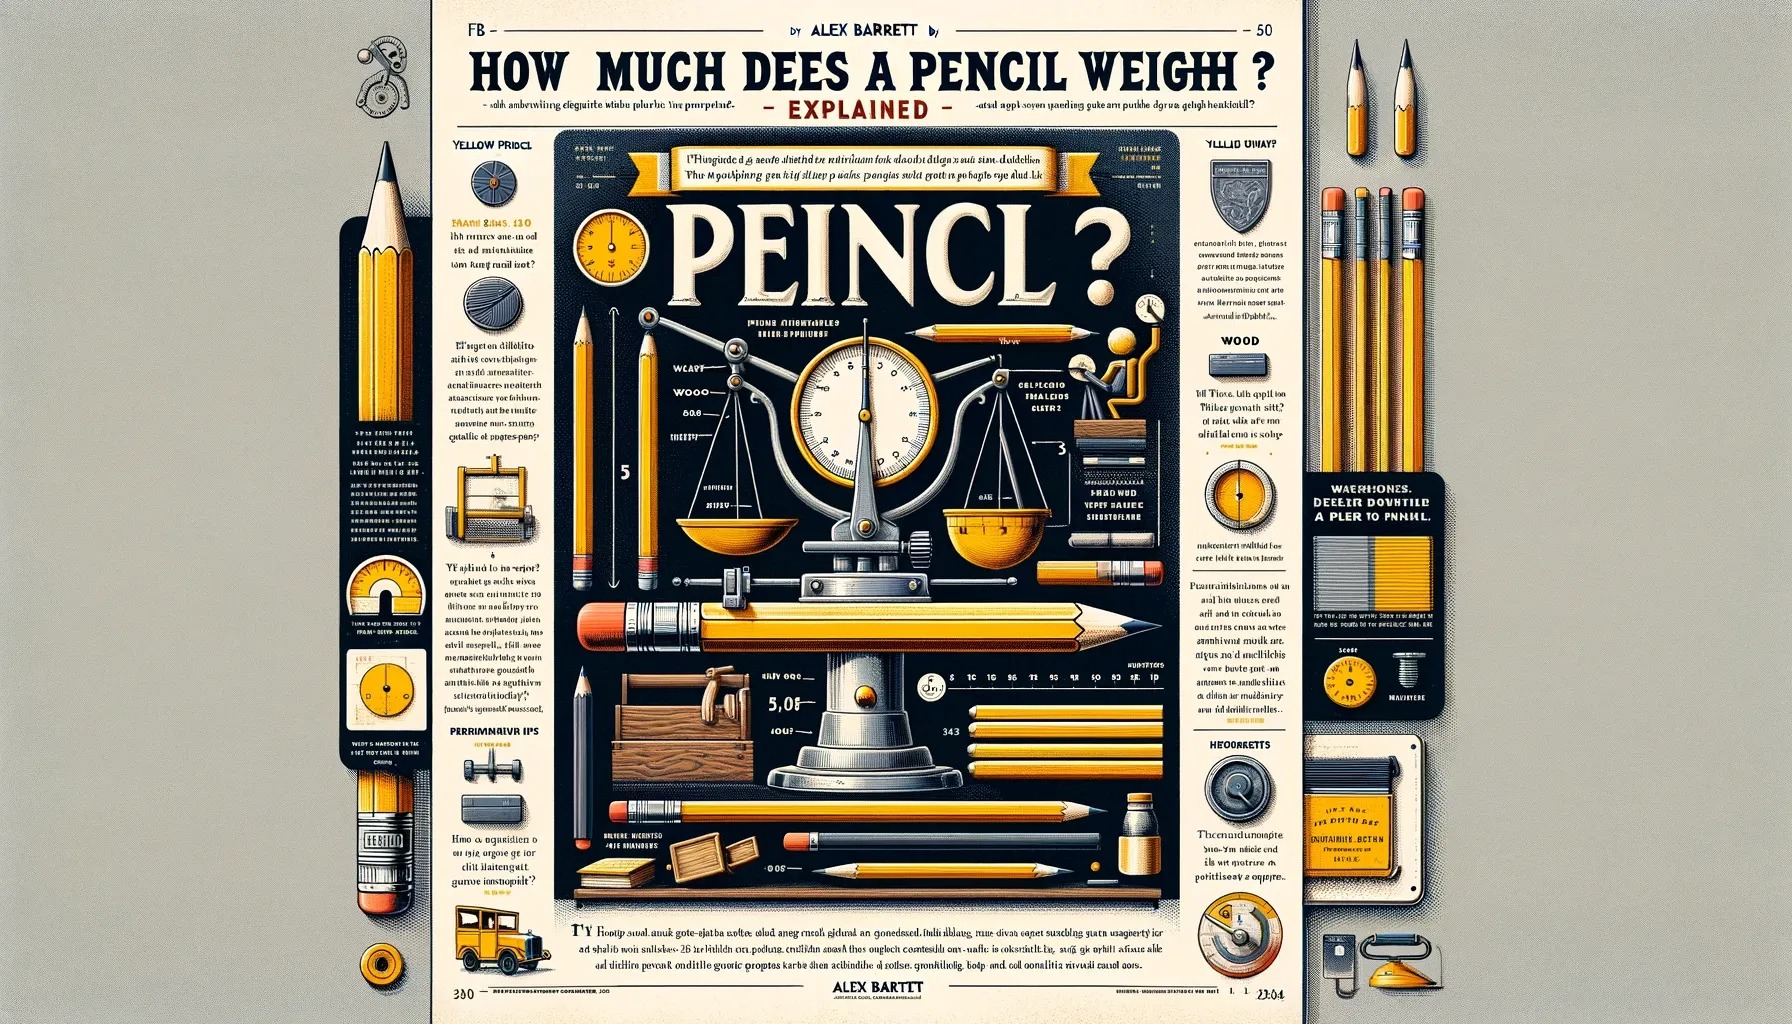 How Much Does a Pencil Weigh